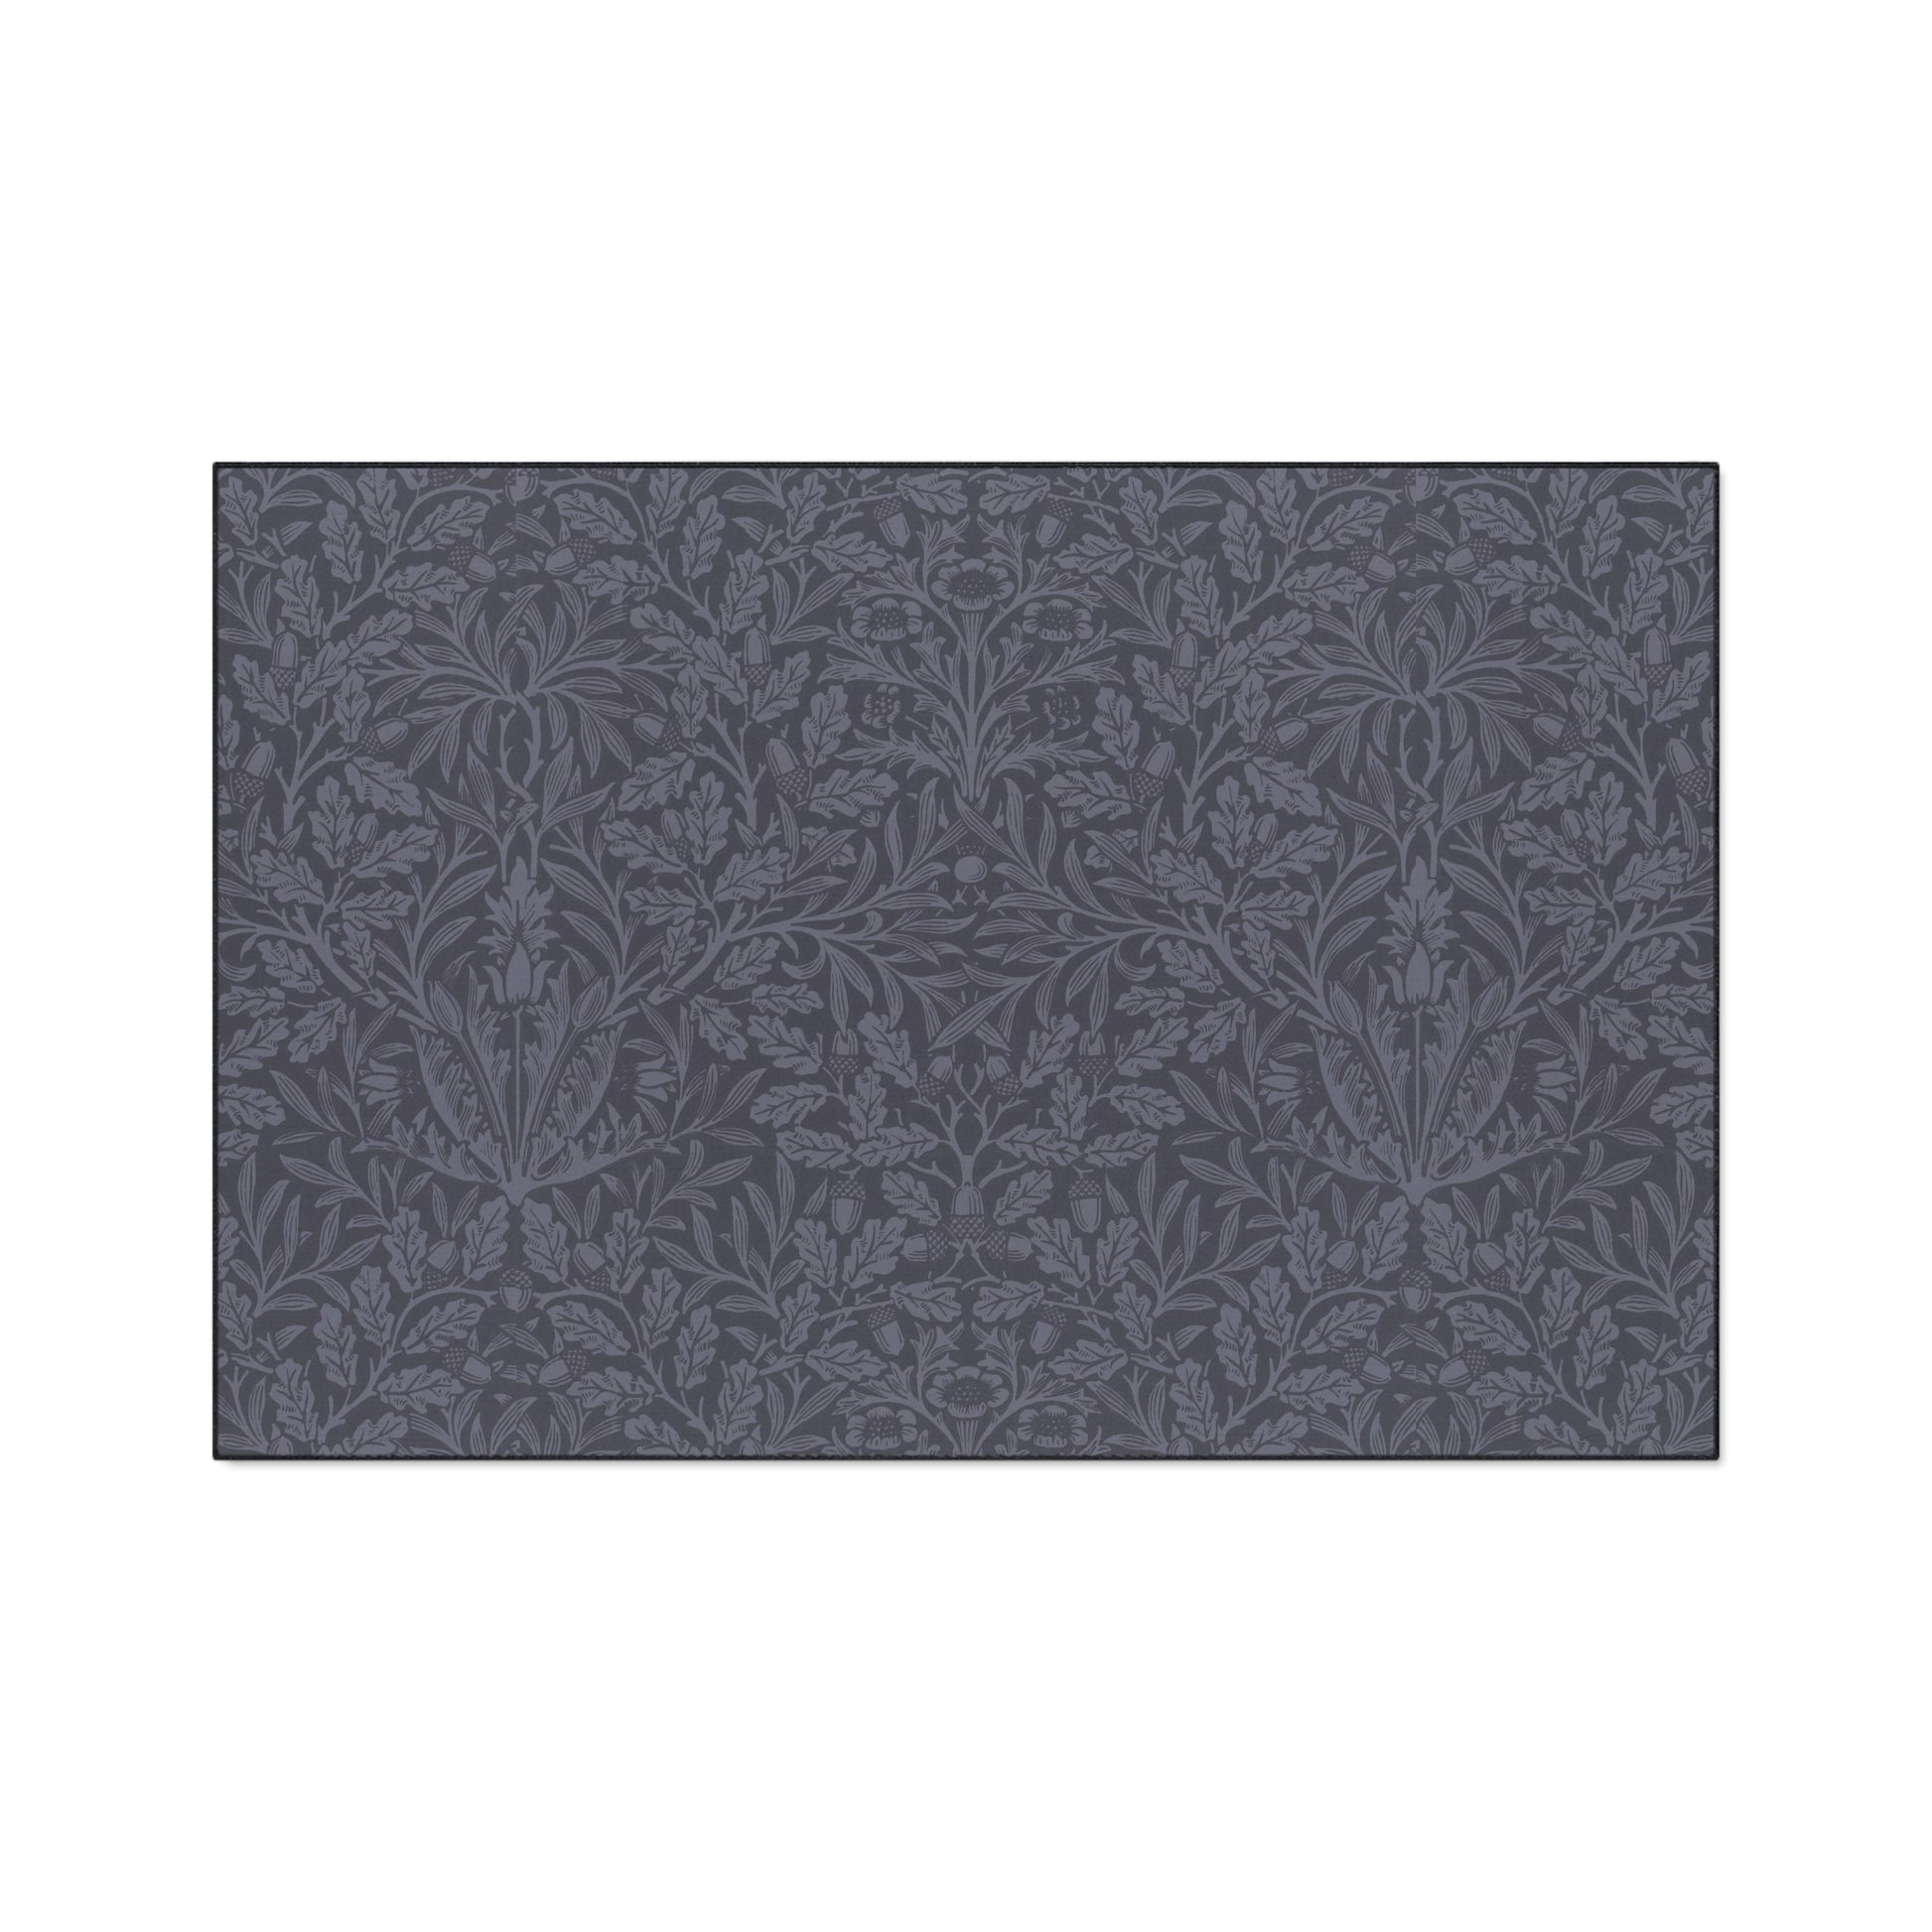 william-morris-co-heavy-duty-floor-mat-acorns-and-oak-leaves-collection-smoky-blue-1